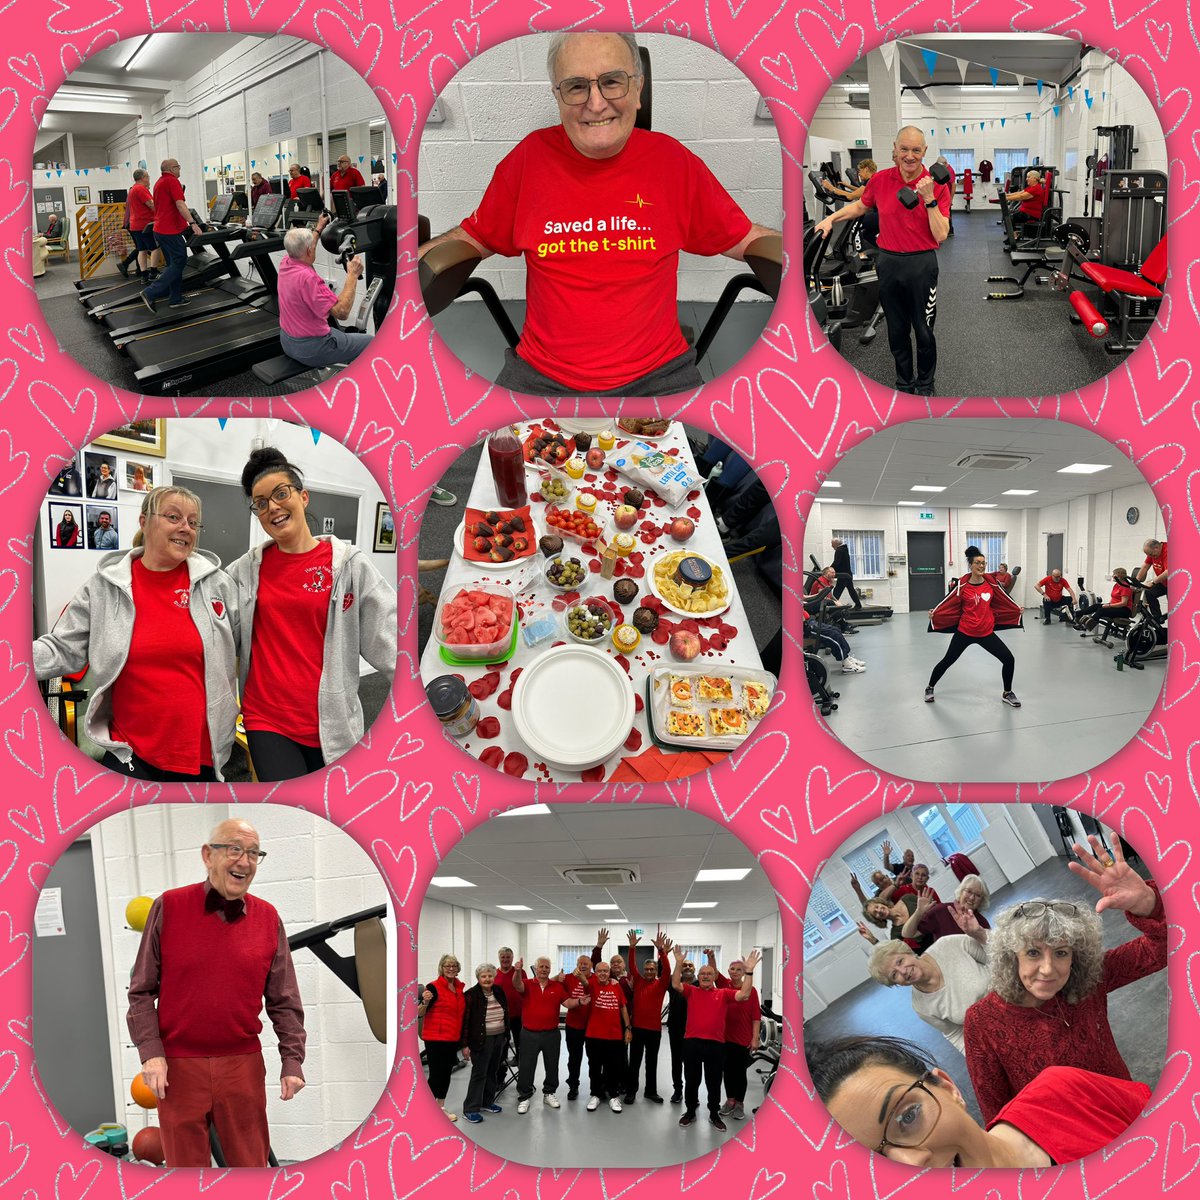 We rounded off the week with more wear 🔴. We’ve had a great week celebrating #heartmonth #CRWeek2024 raising £668.00 from raffles, & contributions. Thank you for participating & getting involved. Your contributions really do help us to keep providing #cardiacrehab @bacpr @TheBHF